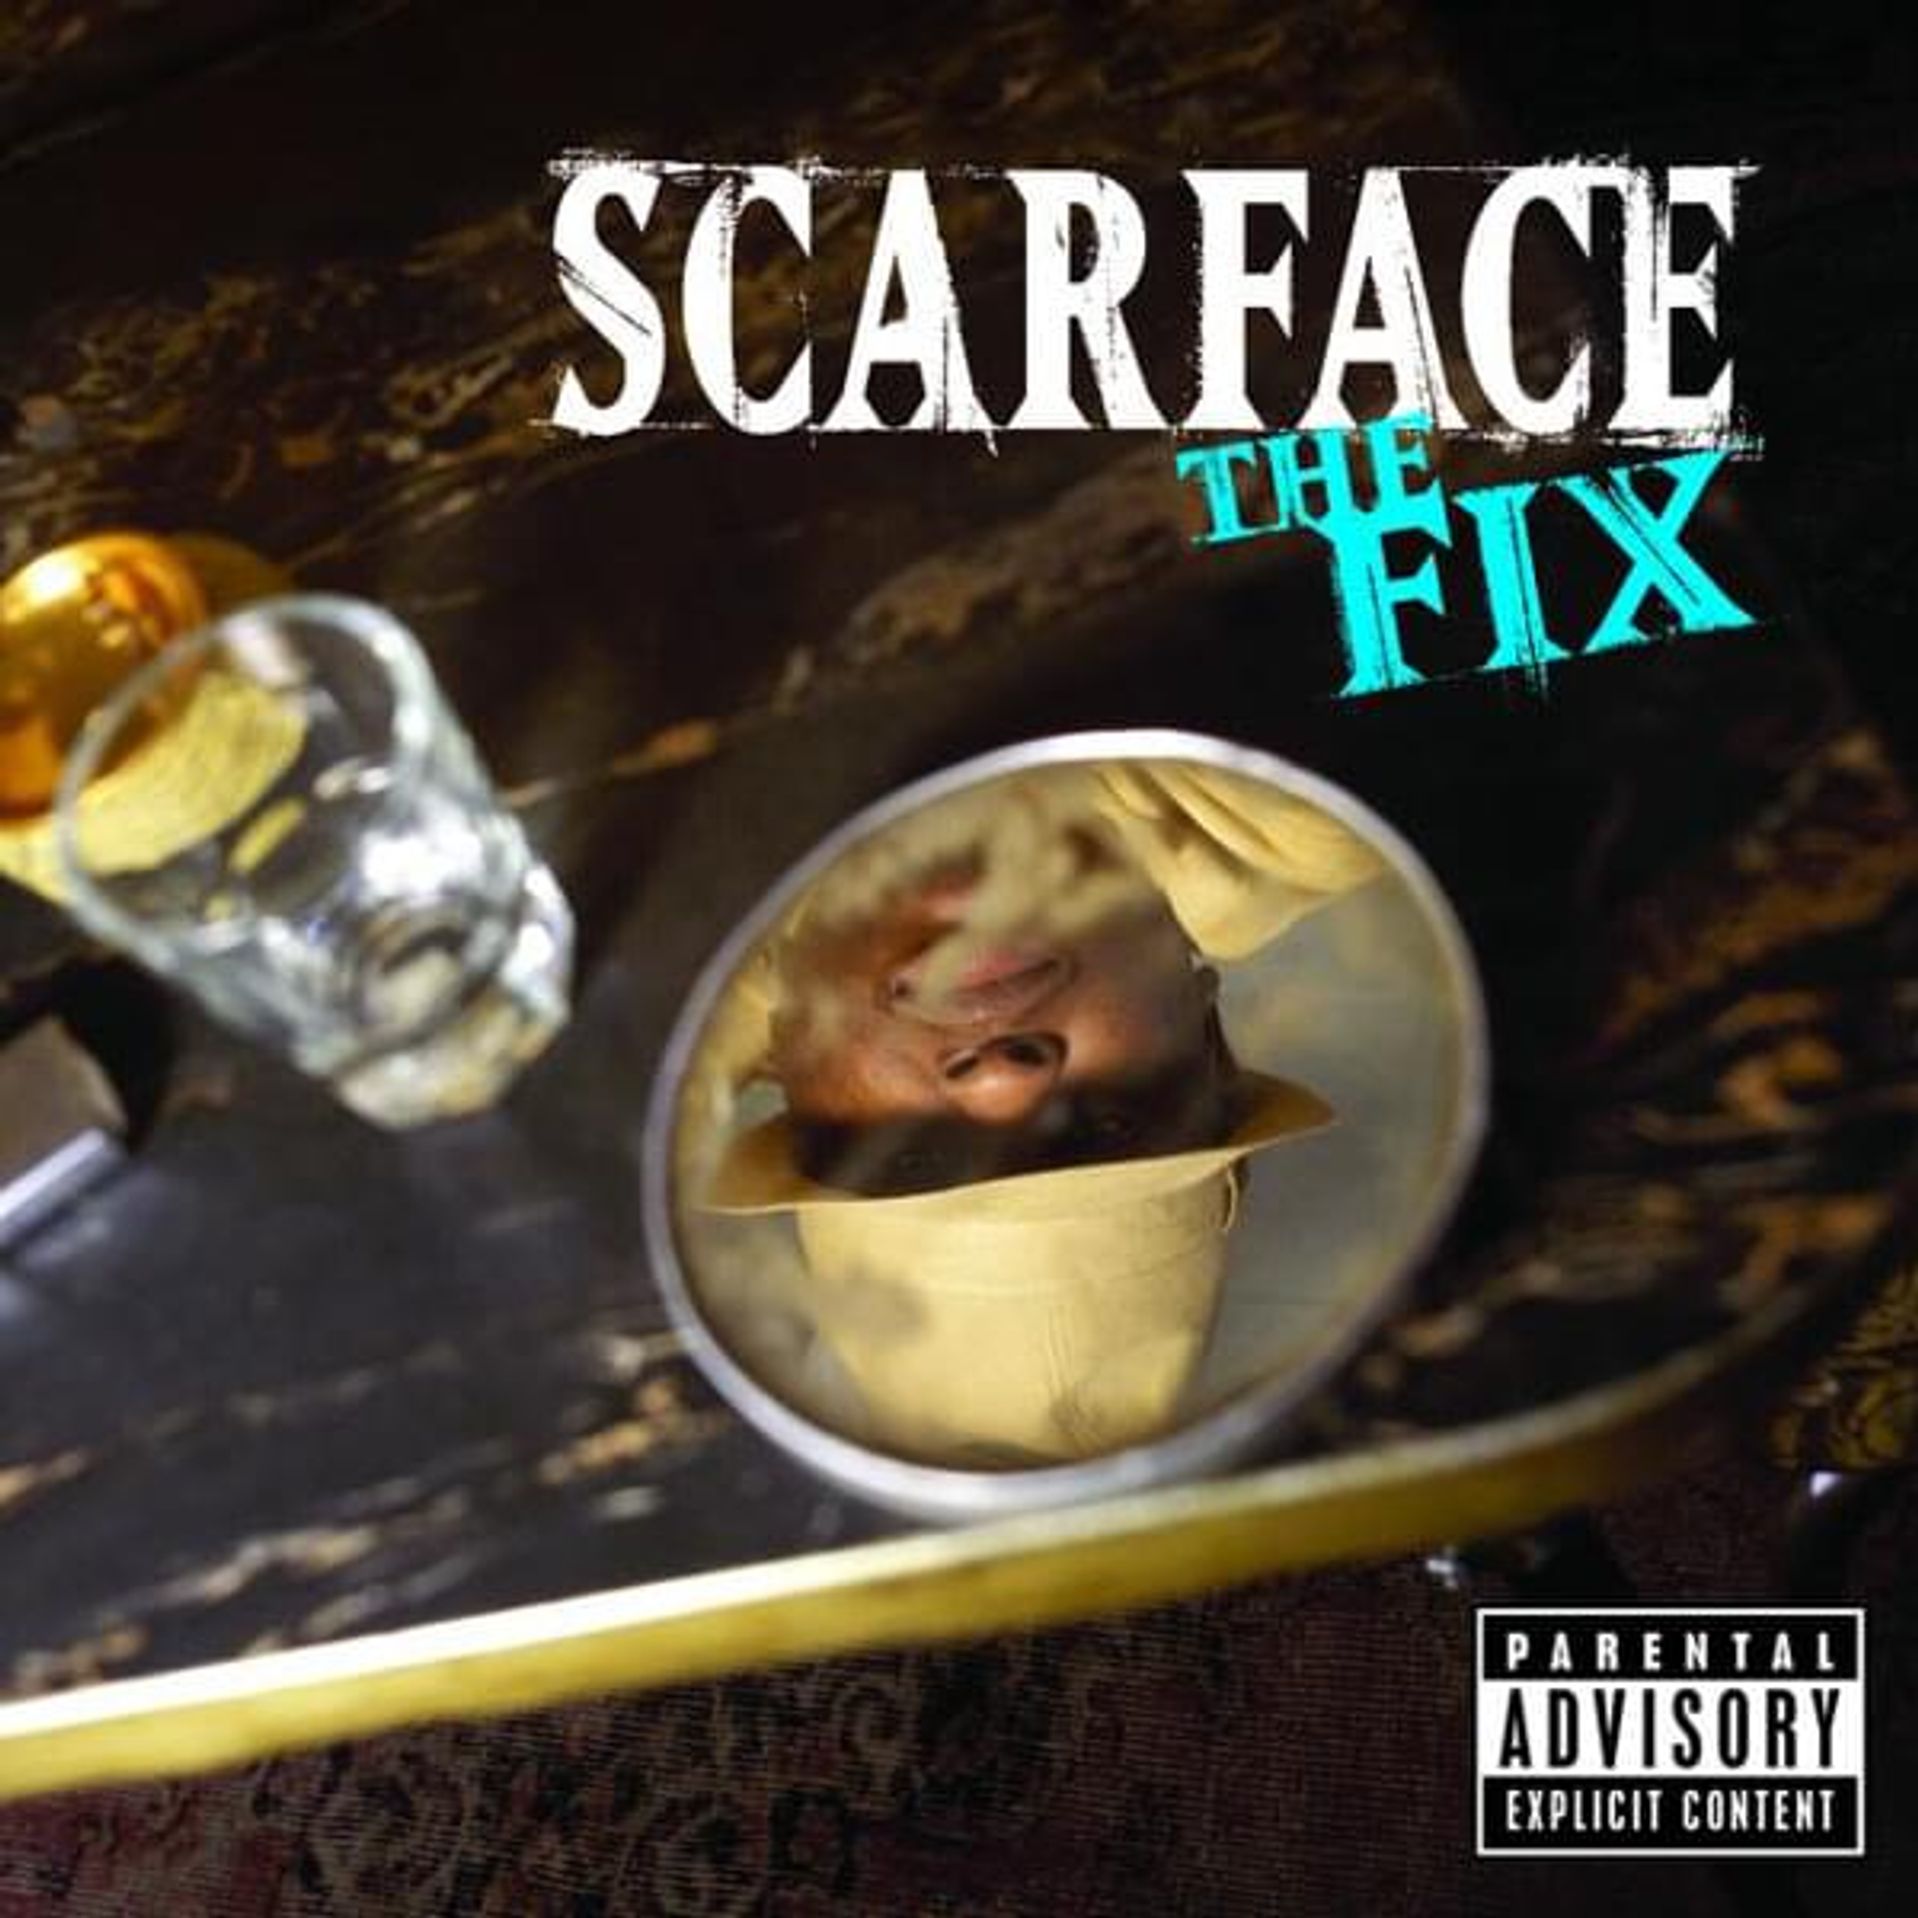 Album Title: The Fix by: Scarface